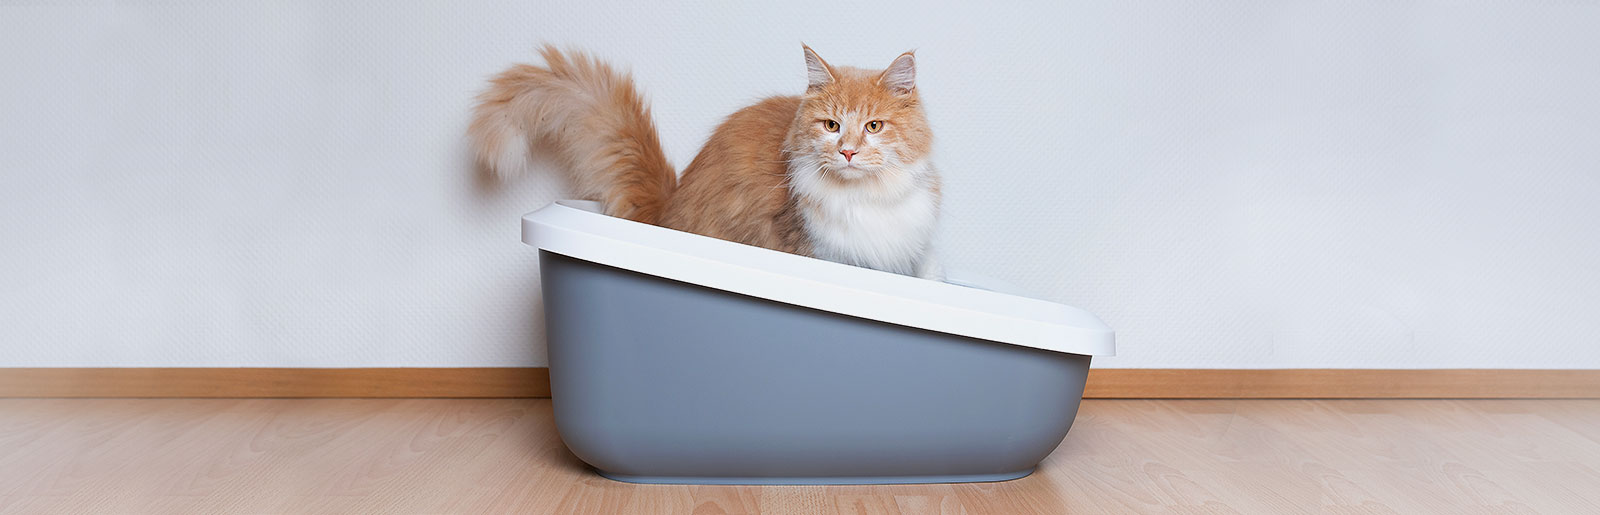 Diarrhoea in cats: Causes and tips